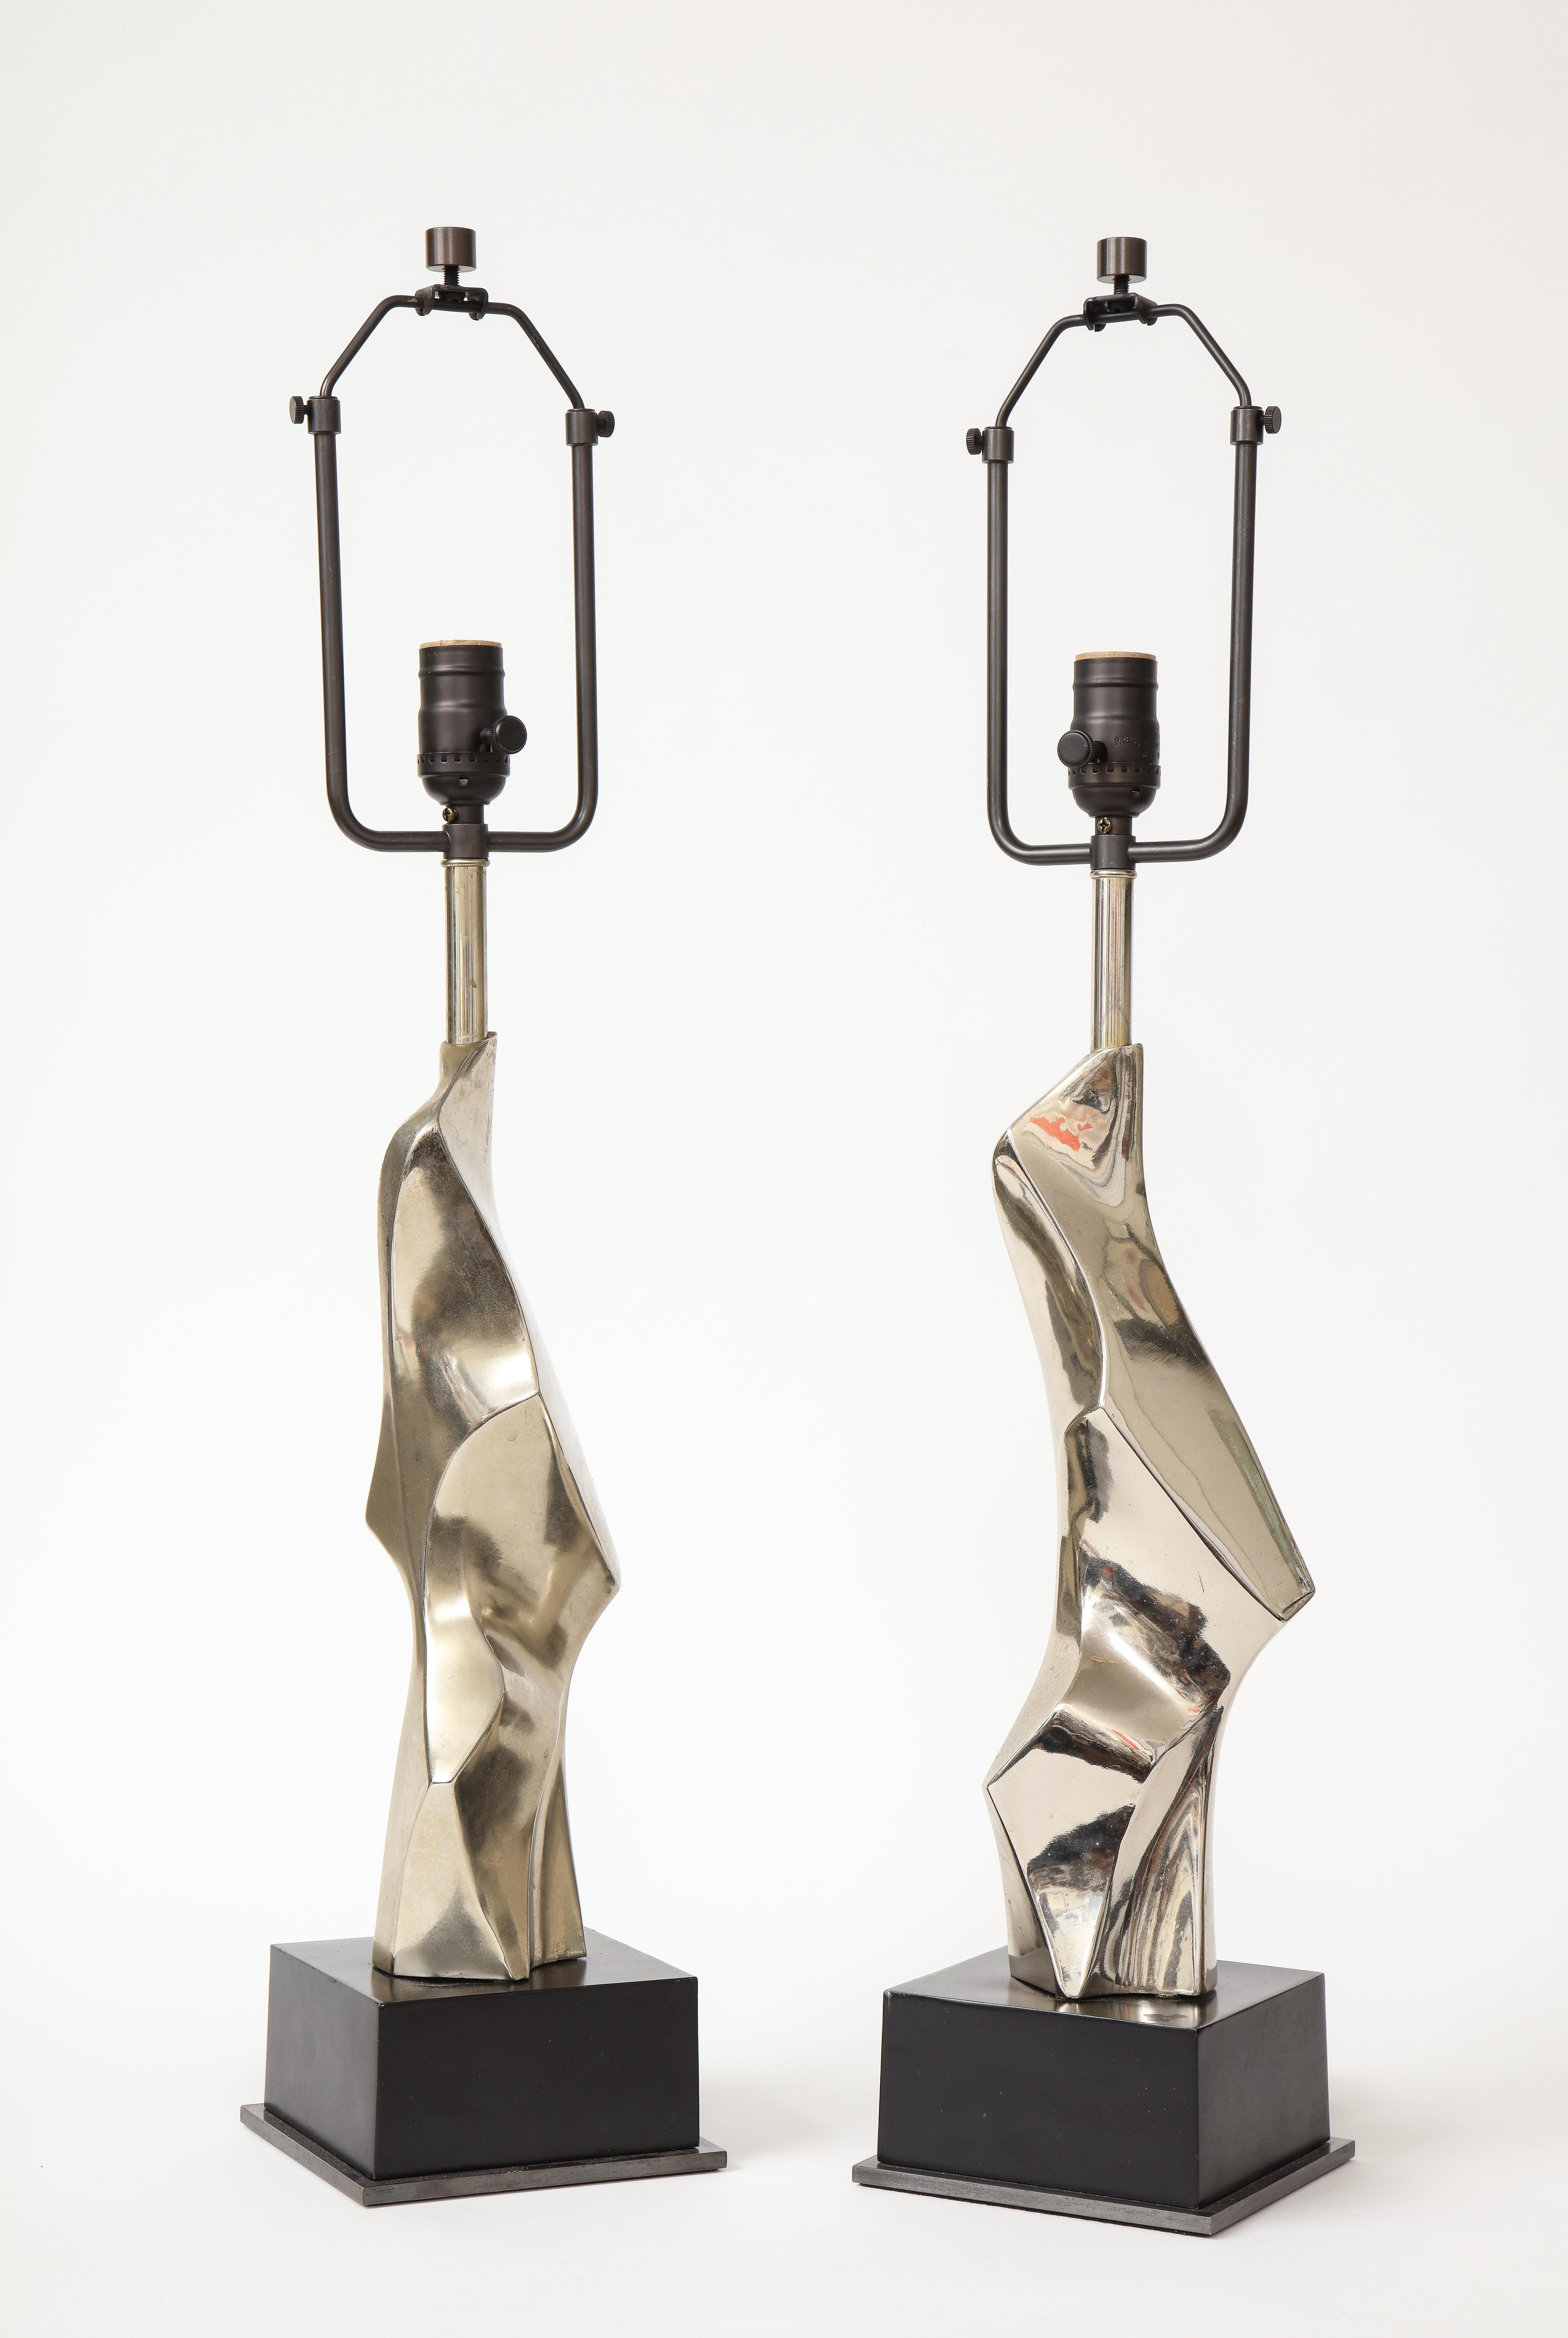 Mid-20th Century Pair of Brutalist Chrome Table Lamps by Richard Barr for Laurel, c. 1960s